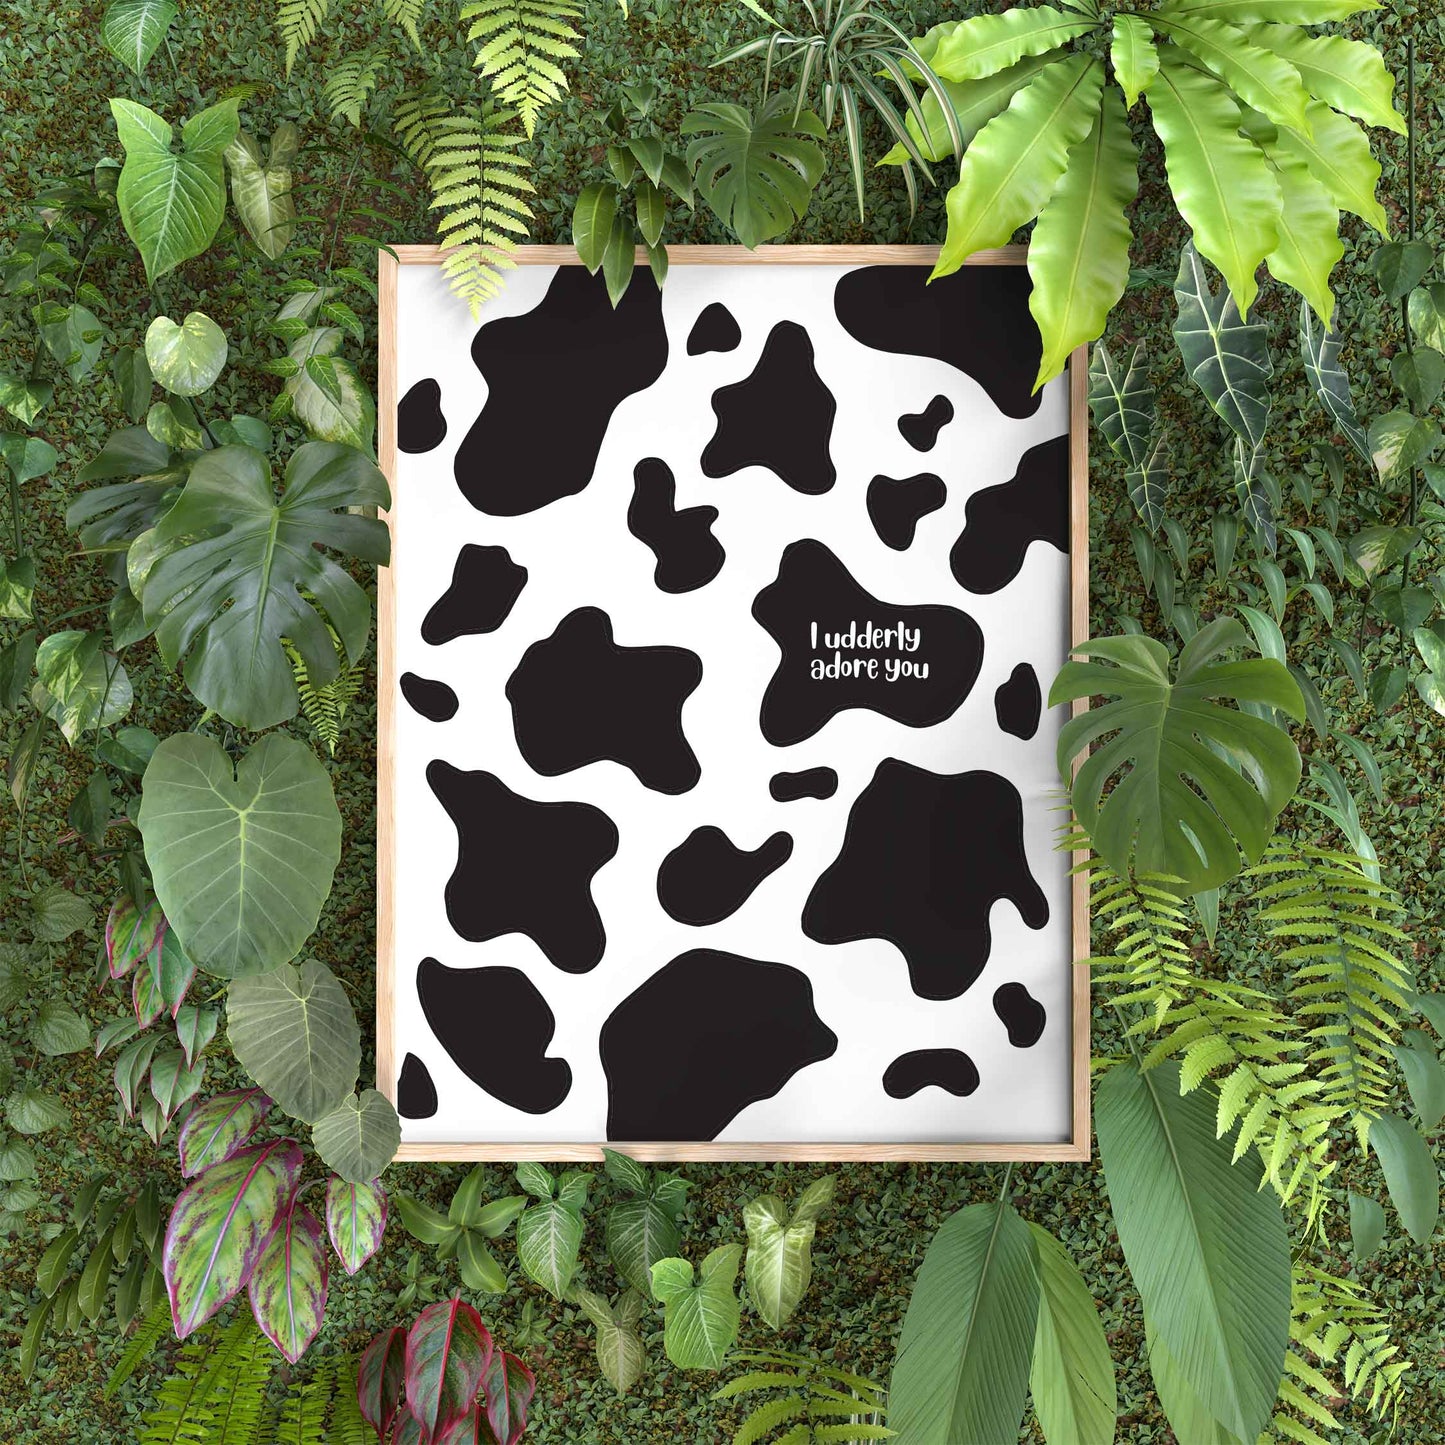 I Udderly Adore You 8x10 in. Art Print